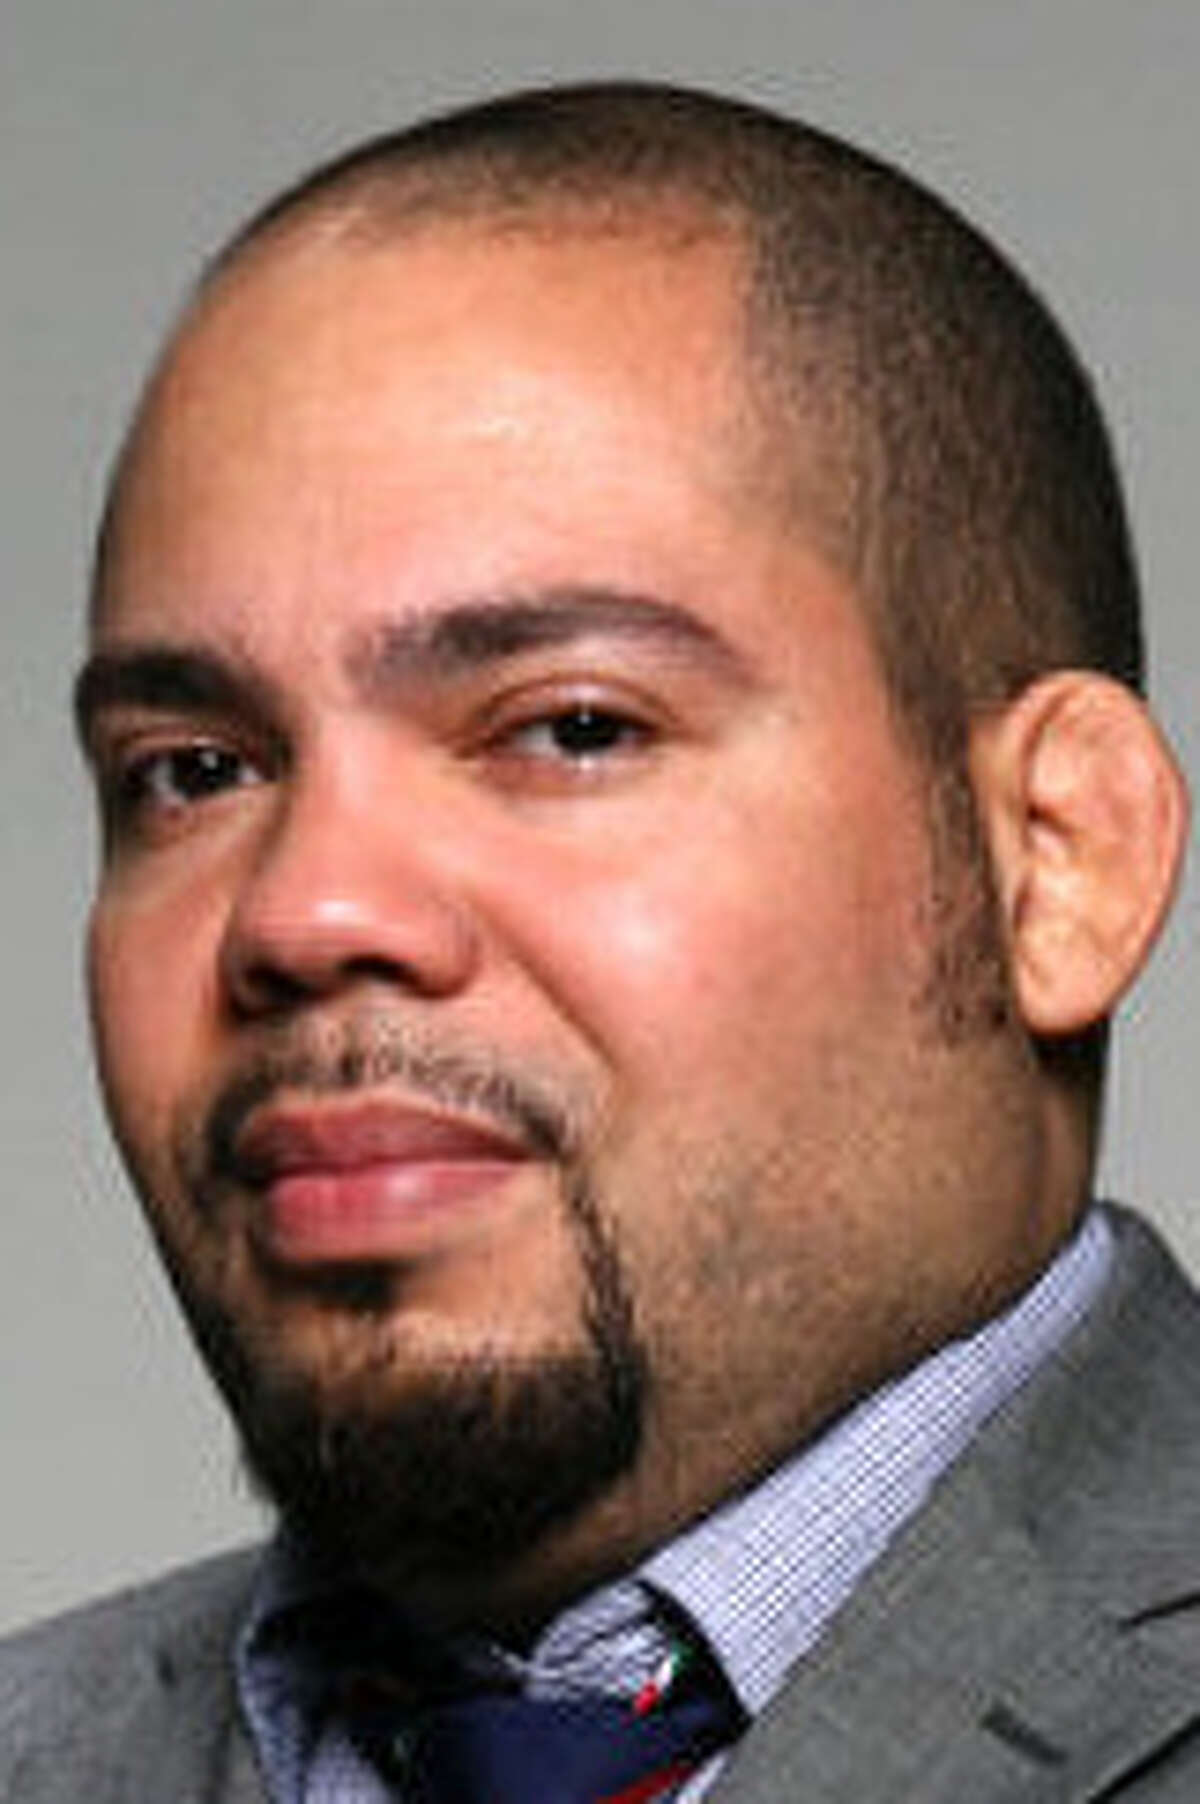 Julian Vasquez Heilig is an associate professor of educational policy and planning at UT-Austin.